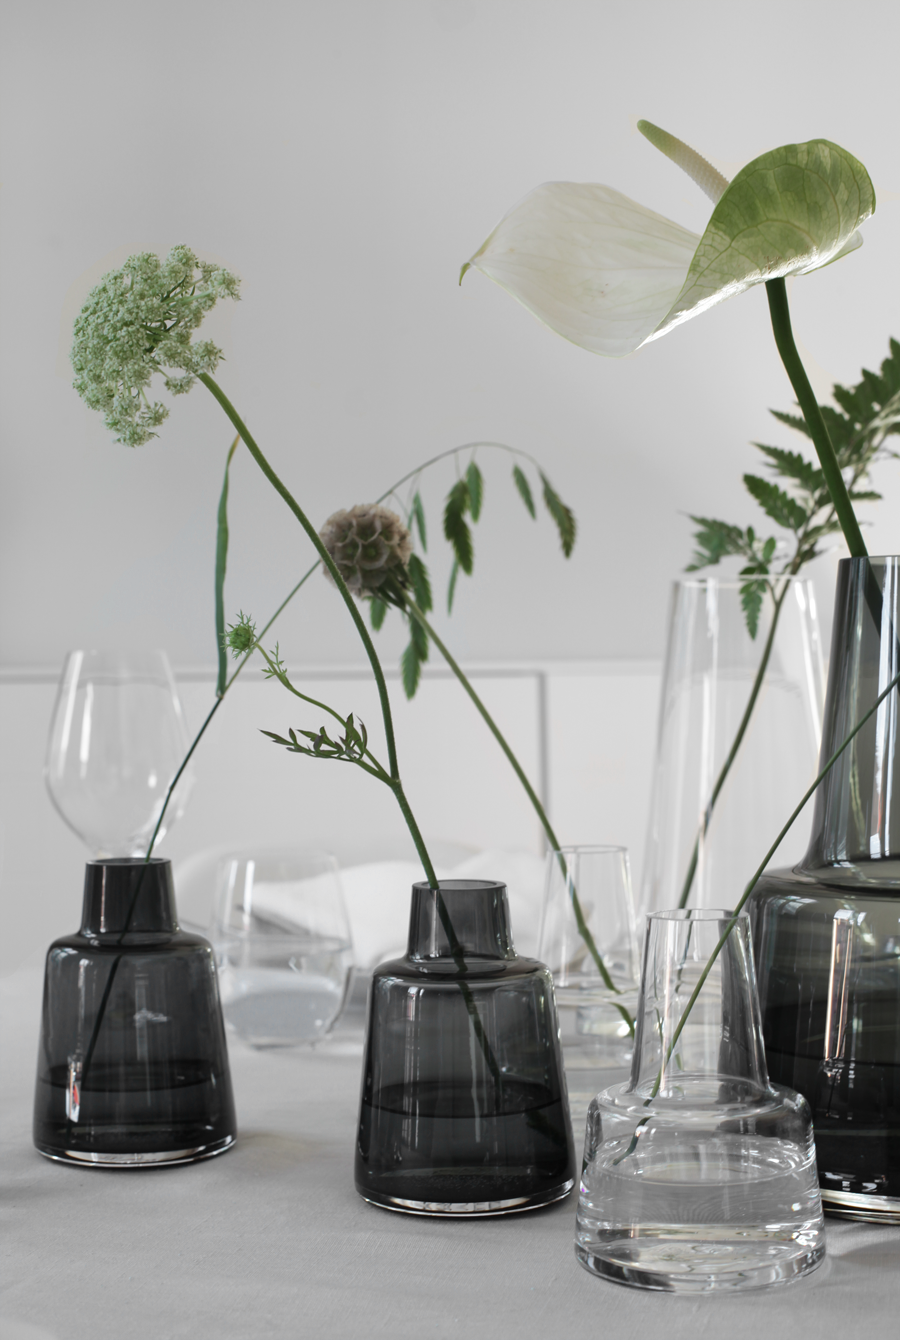 TABLESETTING FOR SUMMER WITH FLORA VASES